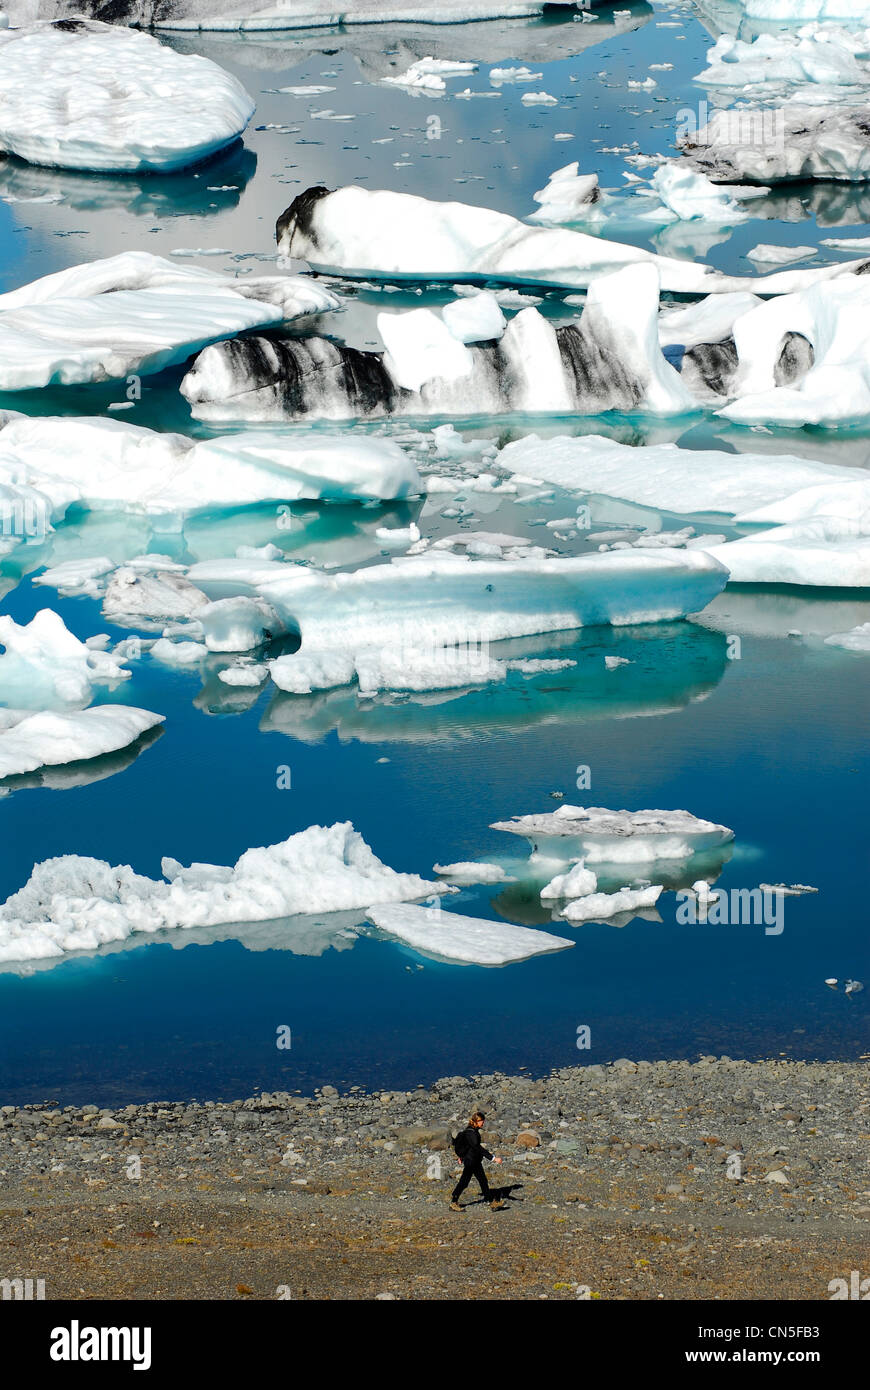 Iceland, Austurland Region, walker in front of the Jokulsarlon Glacial Lake and its icebergs Stock Photo